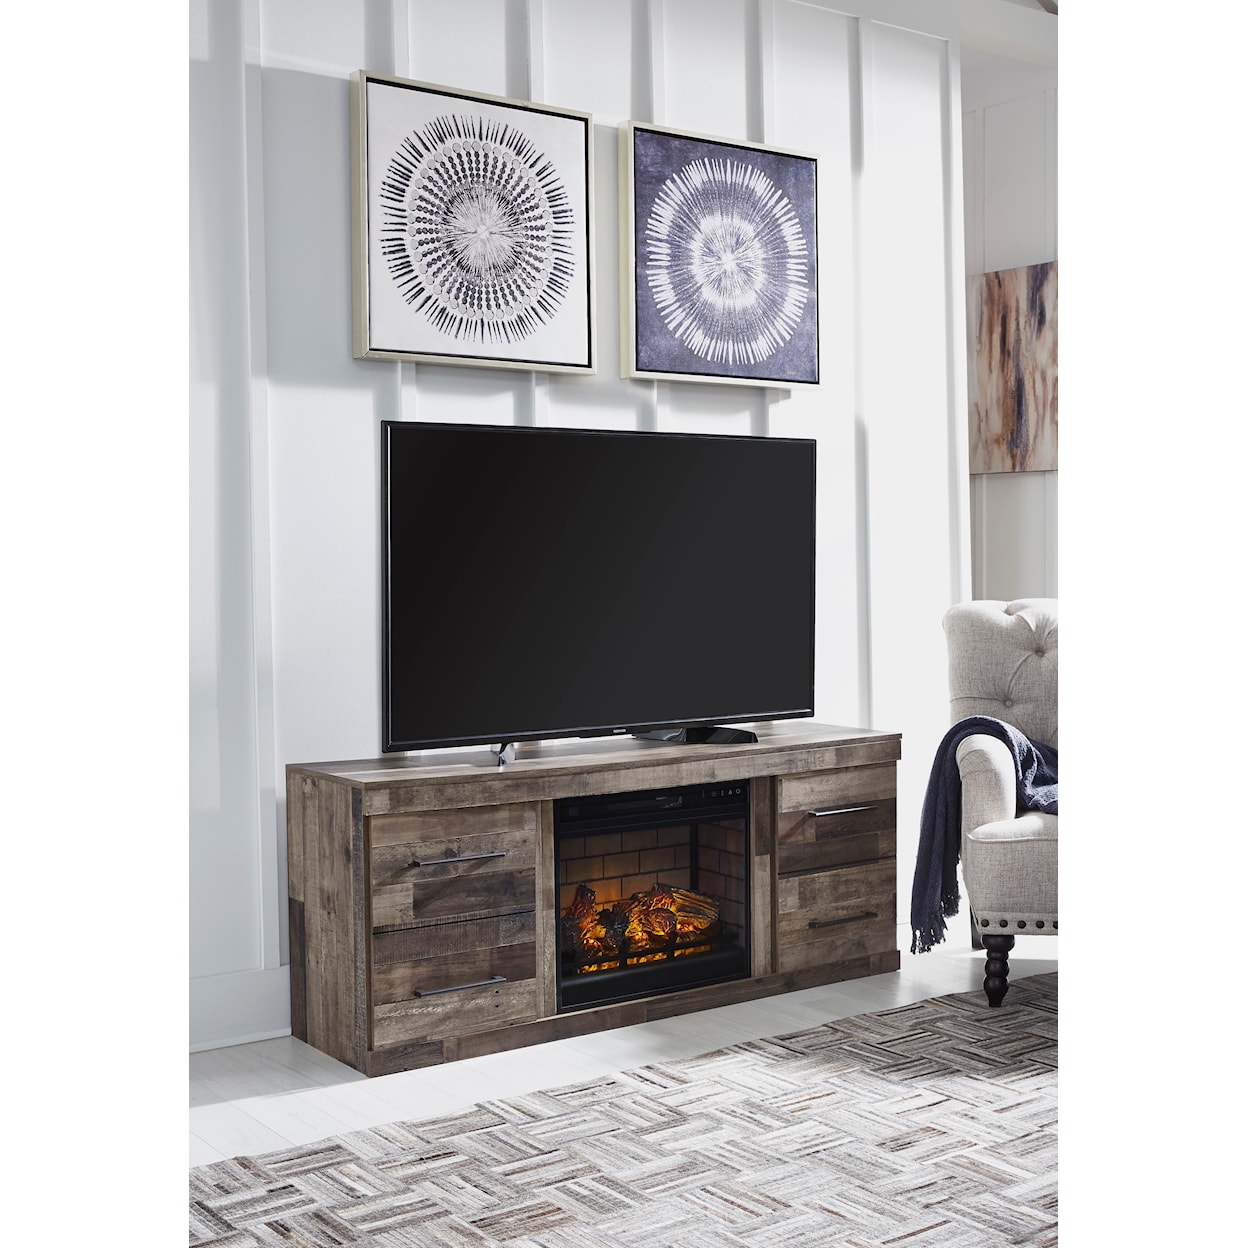 Benchcraft Derekson 60" TV Stand with Electric Fireplace